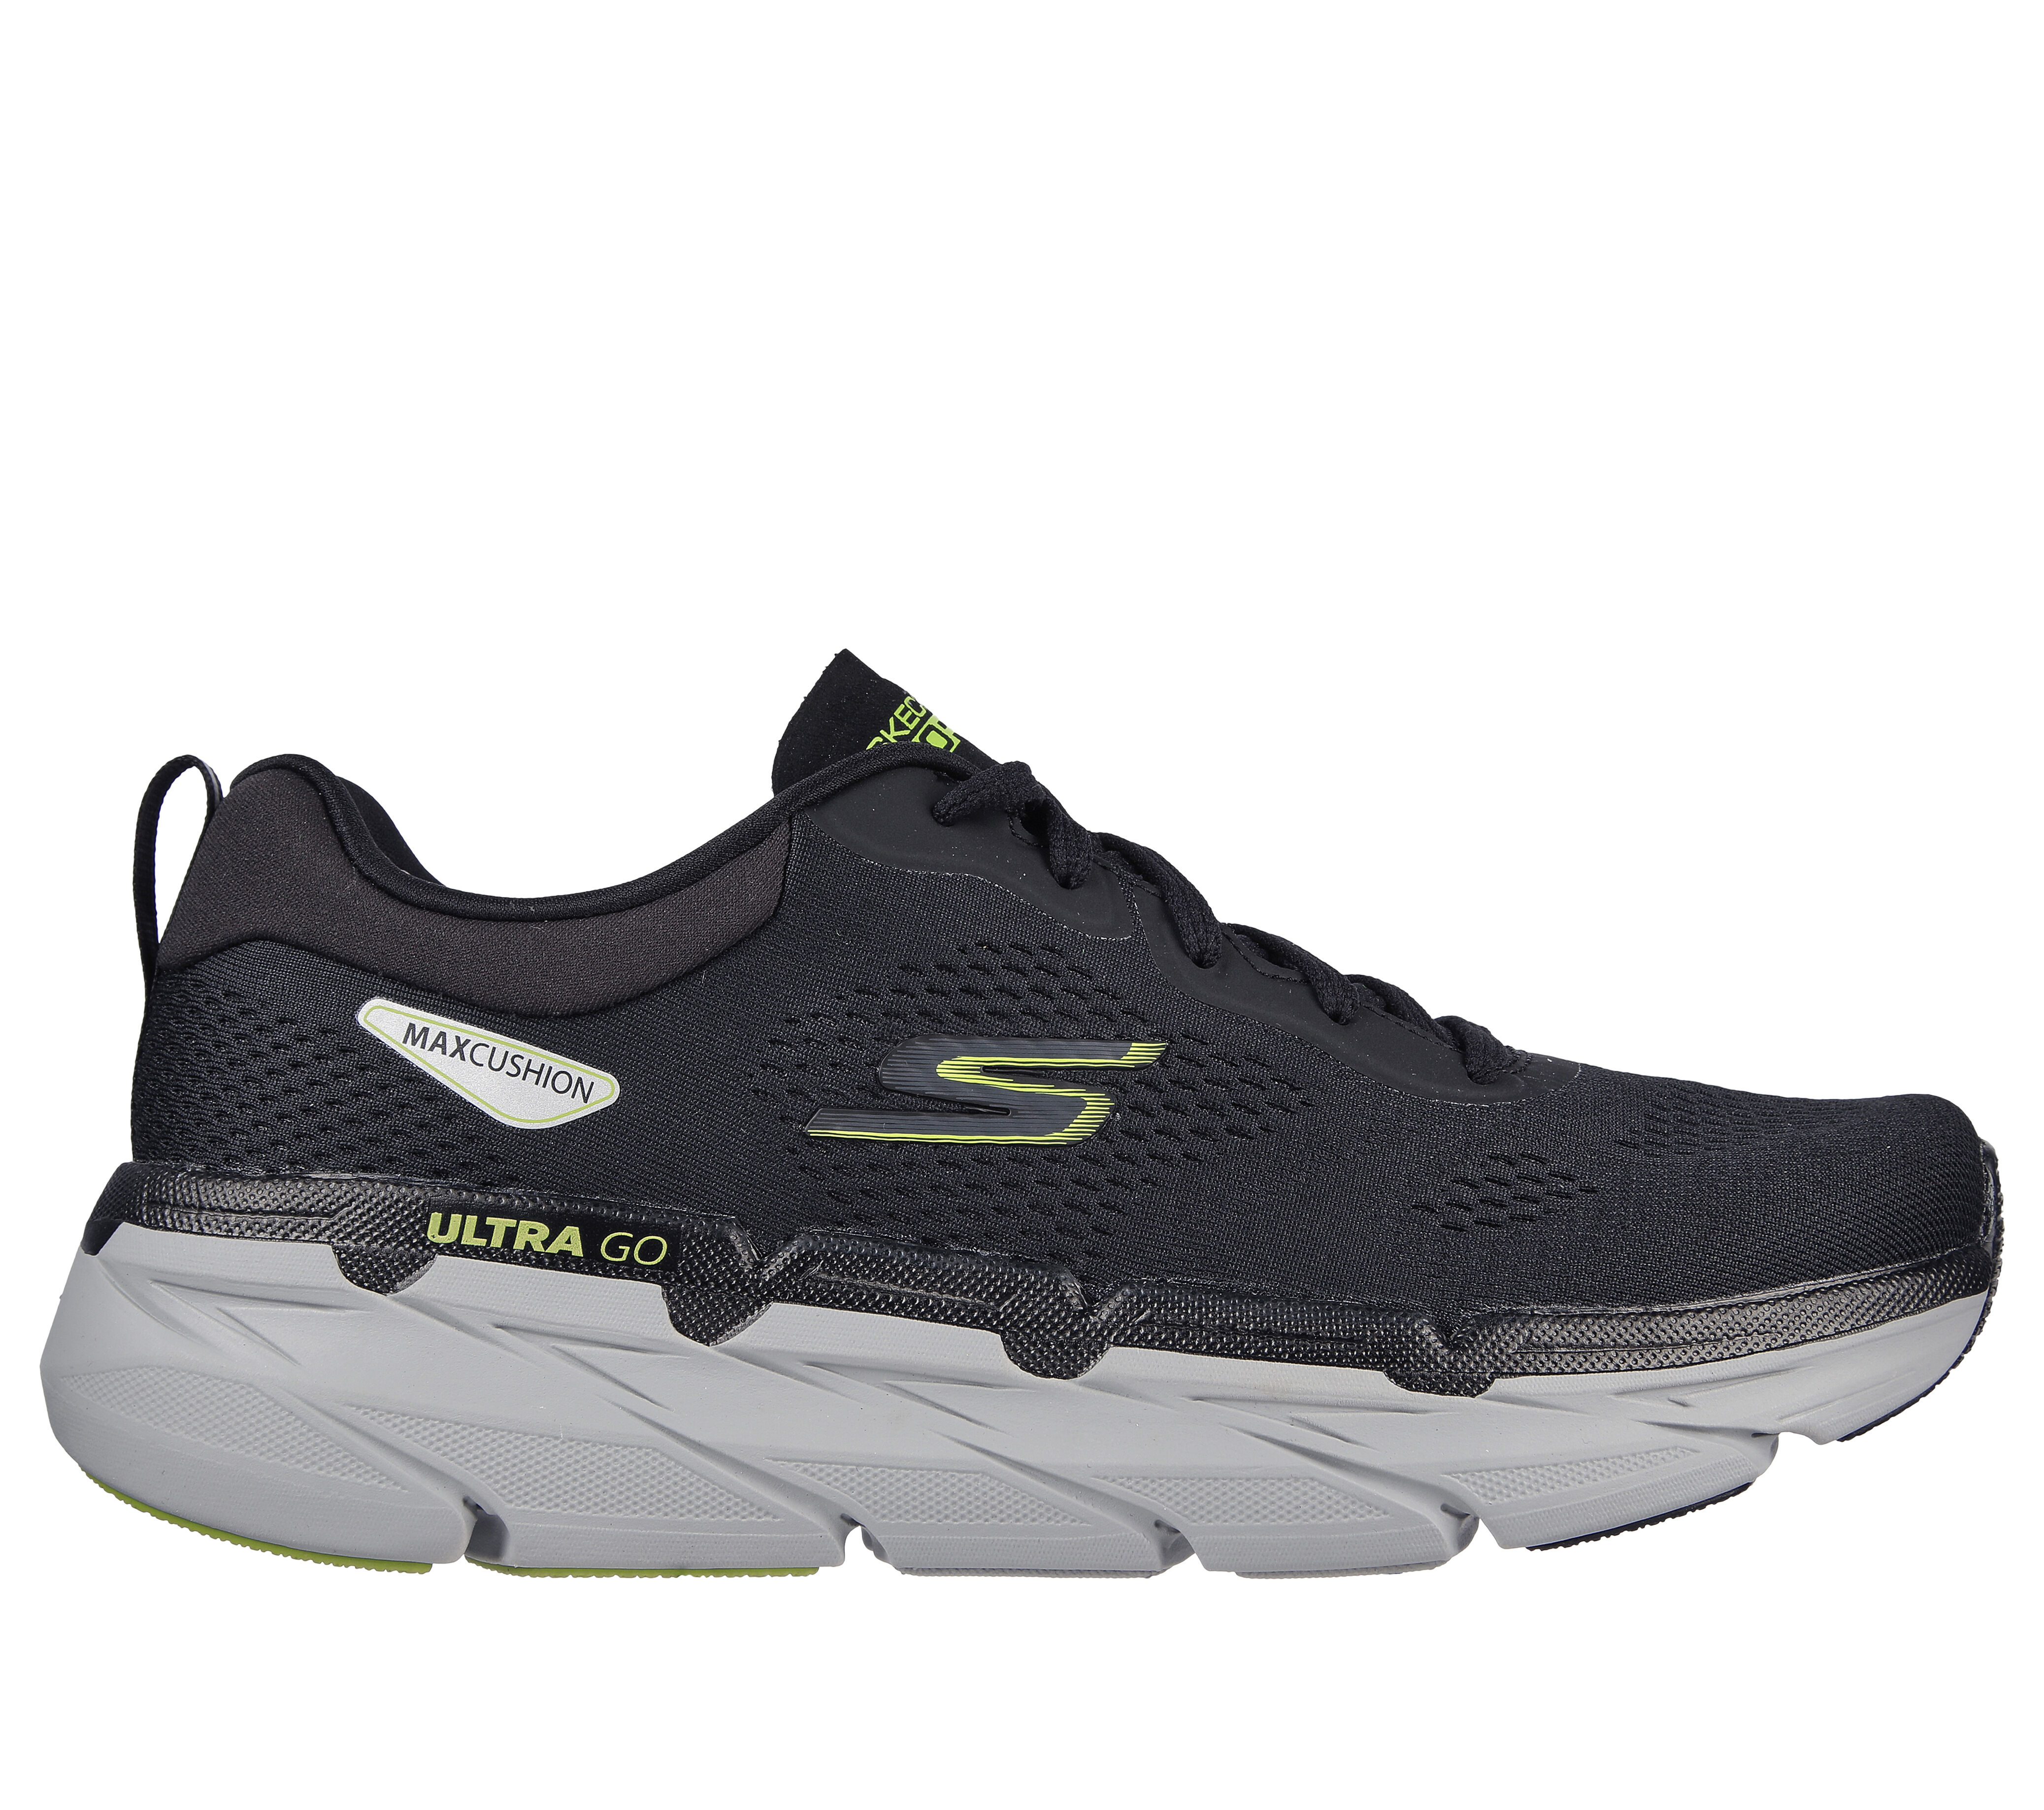 skechers sport shoes price